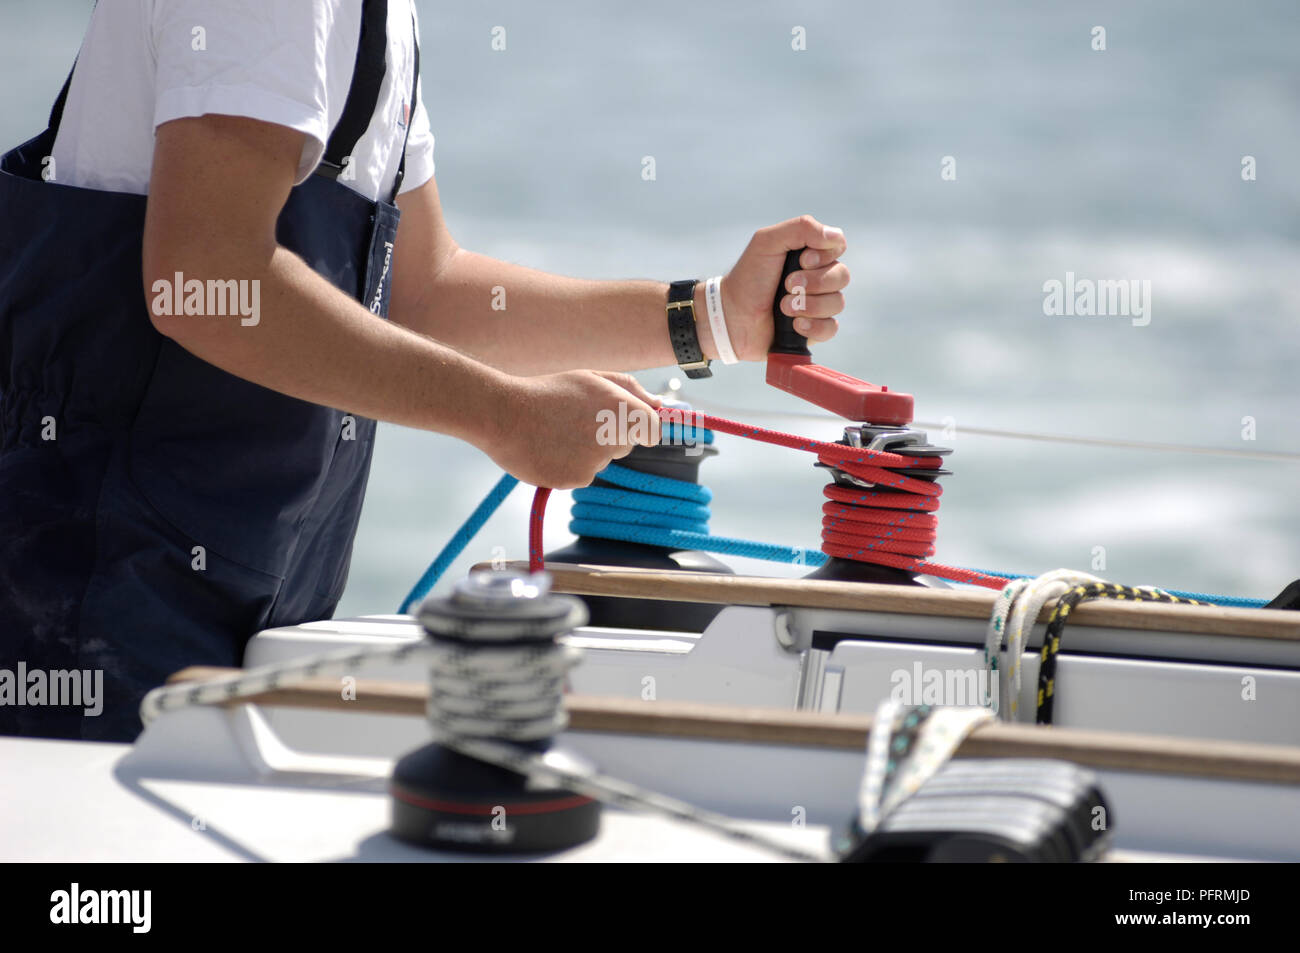 Person on boat winding rope around capstan Stock Photo